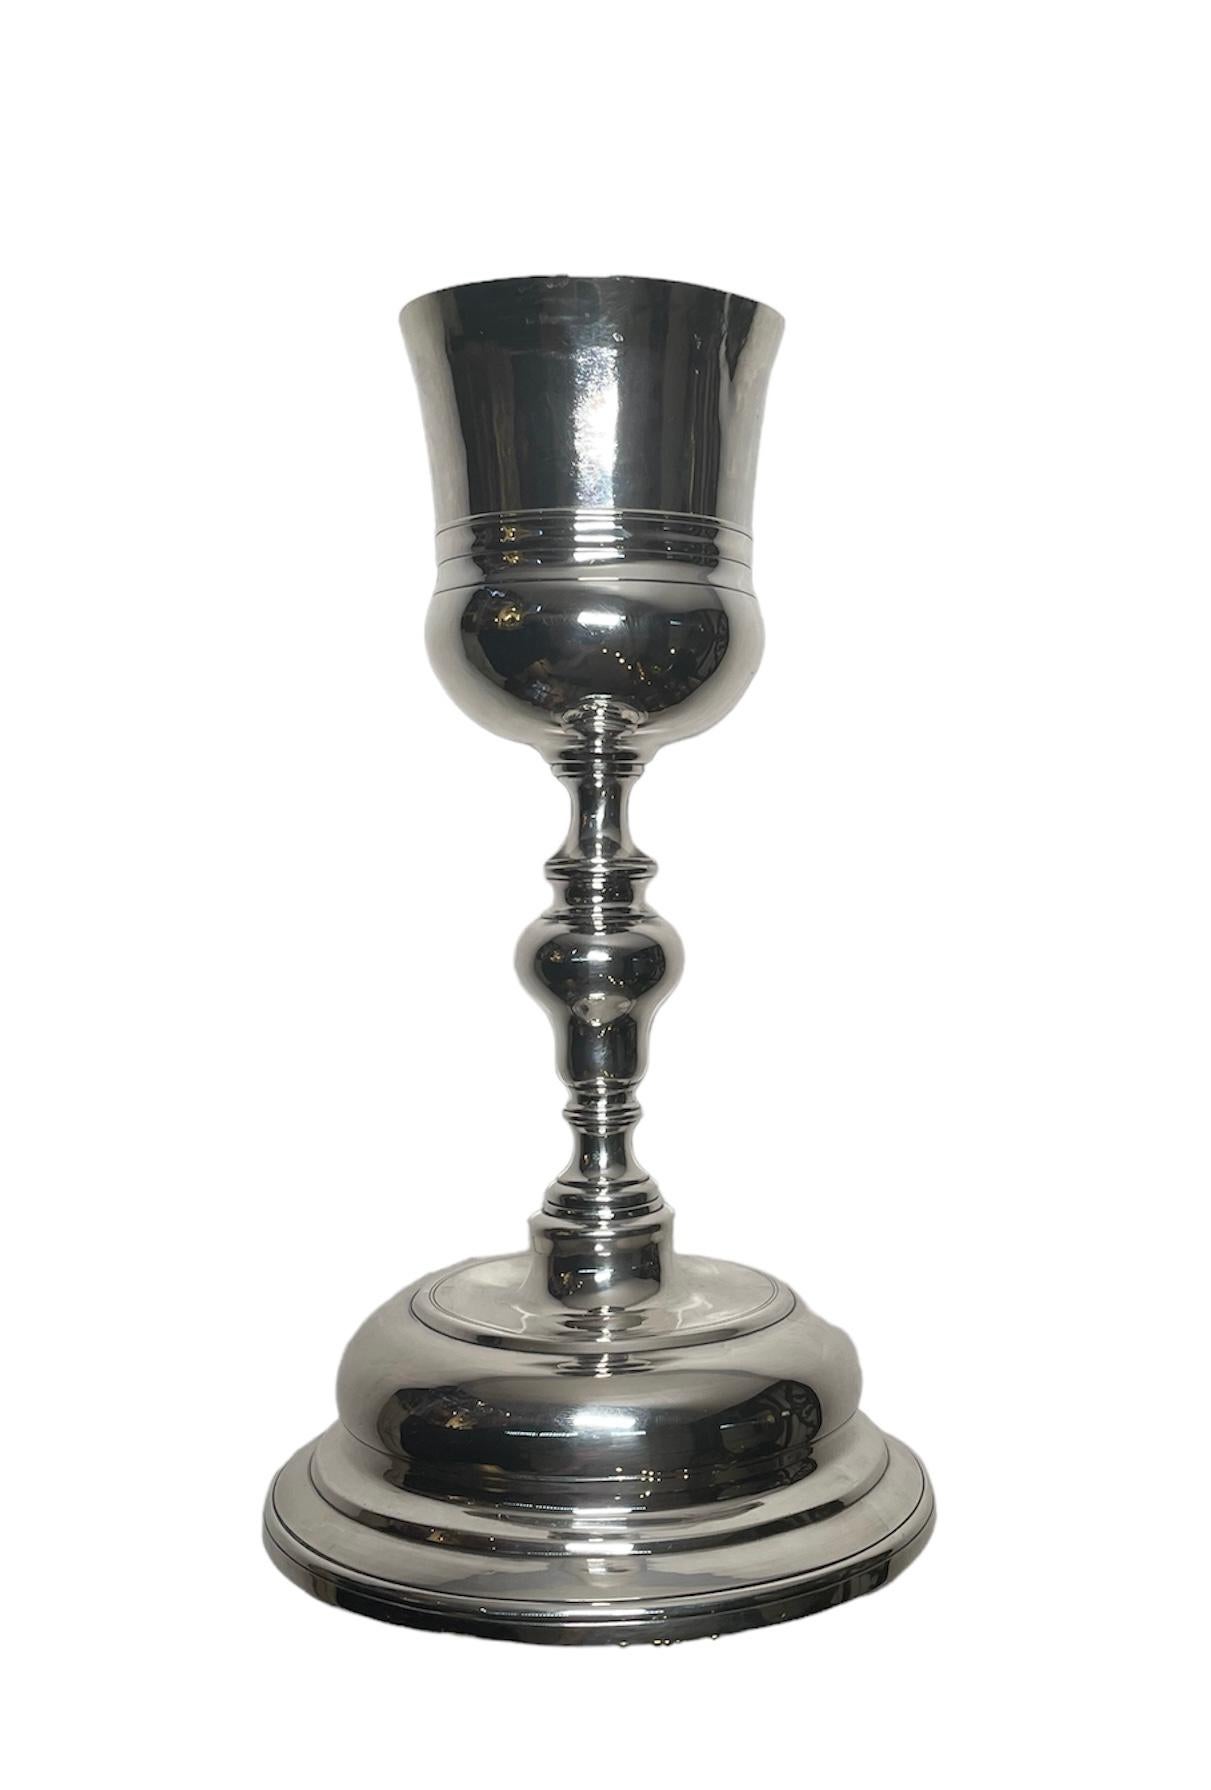 This is a 19th century Spaniard Silver Chalice. It depicts a bell shaped cup supported by a a baluster like stem standing over a round three steps base. At the border of the base is hallmarked Costa, R-ATE and the Malta cross with the letters BAR (